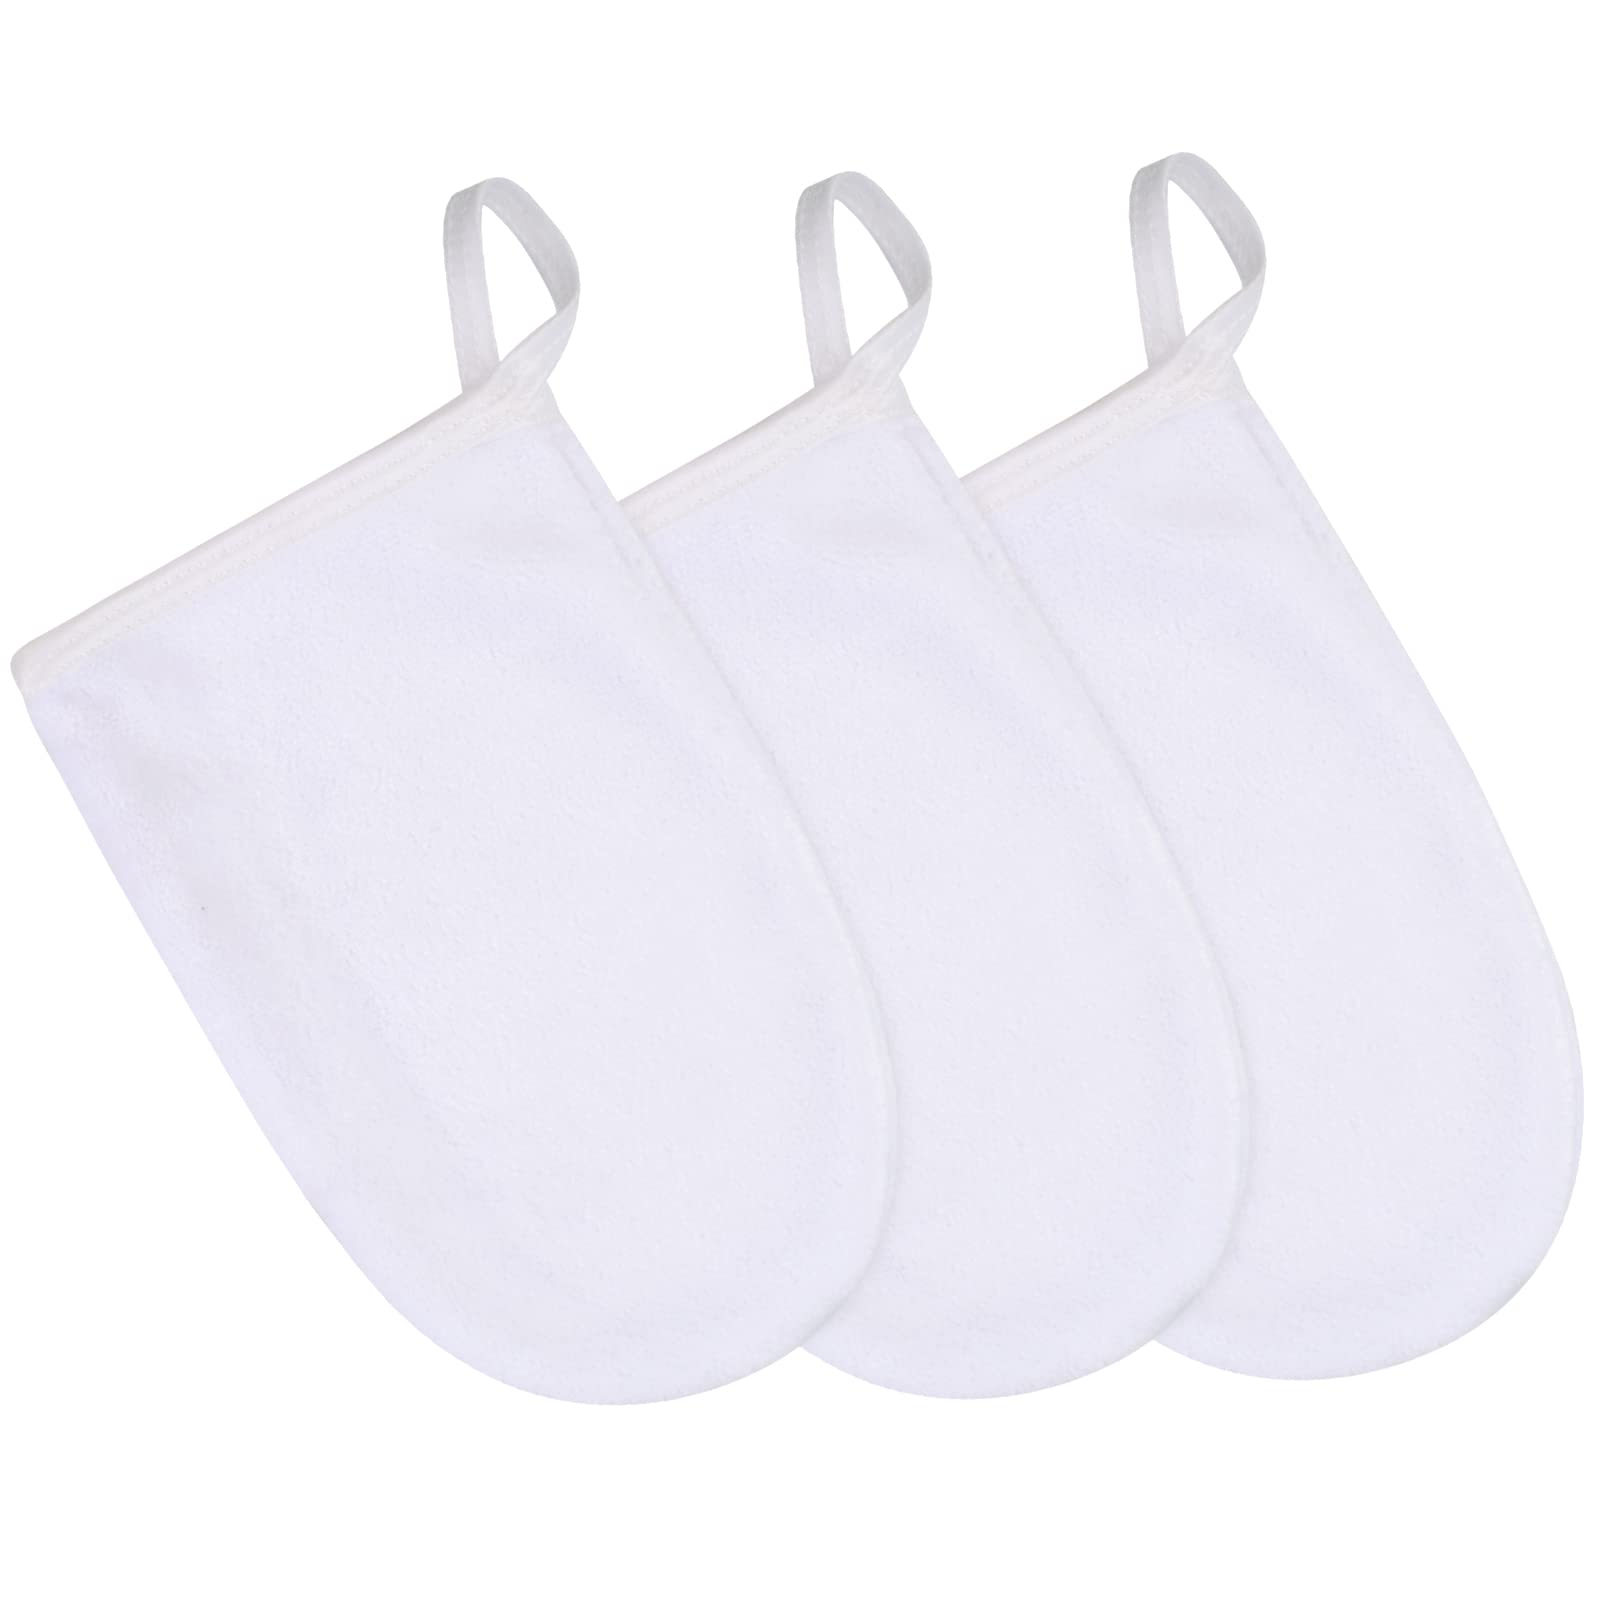 Hottest microfiber Reusable Makeup Remover mitts